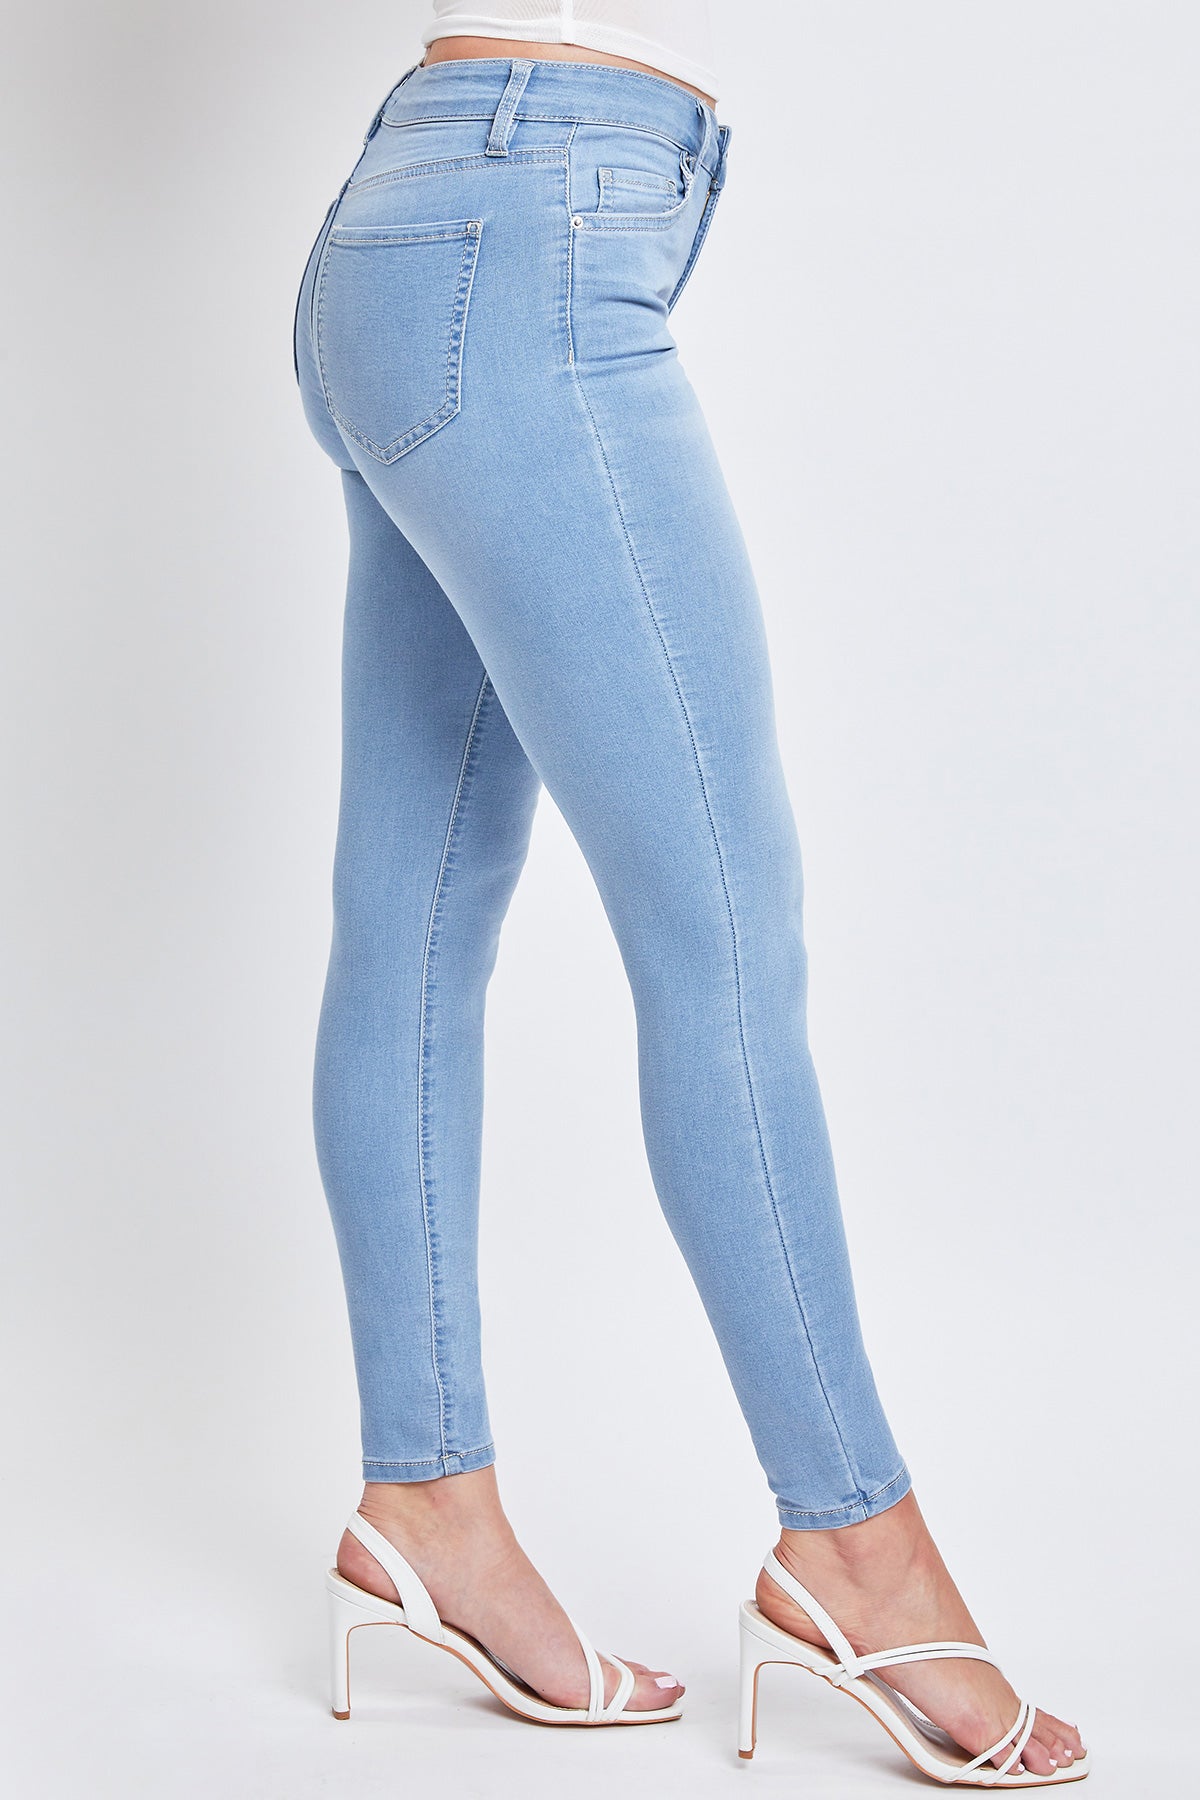 Junior Plus Size Hyper Denim Super Stretchy Flare Jean Pack Of 6 from YMI –  YMI JEANS WHOLESALE